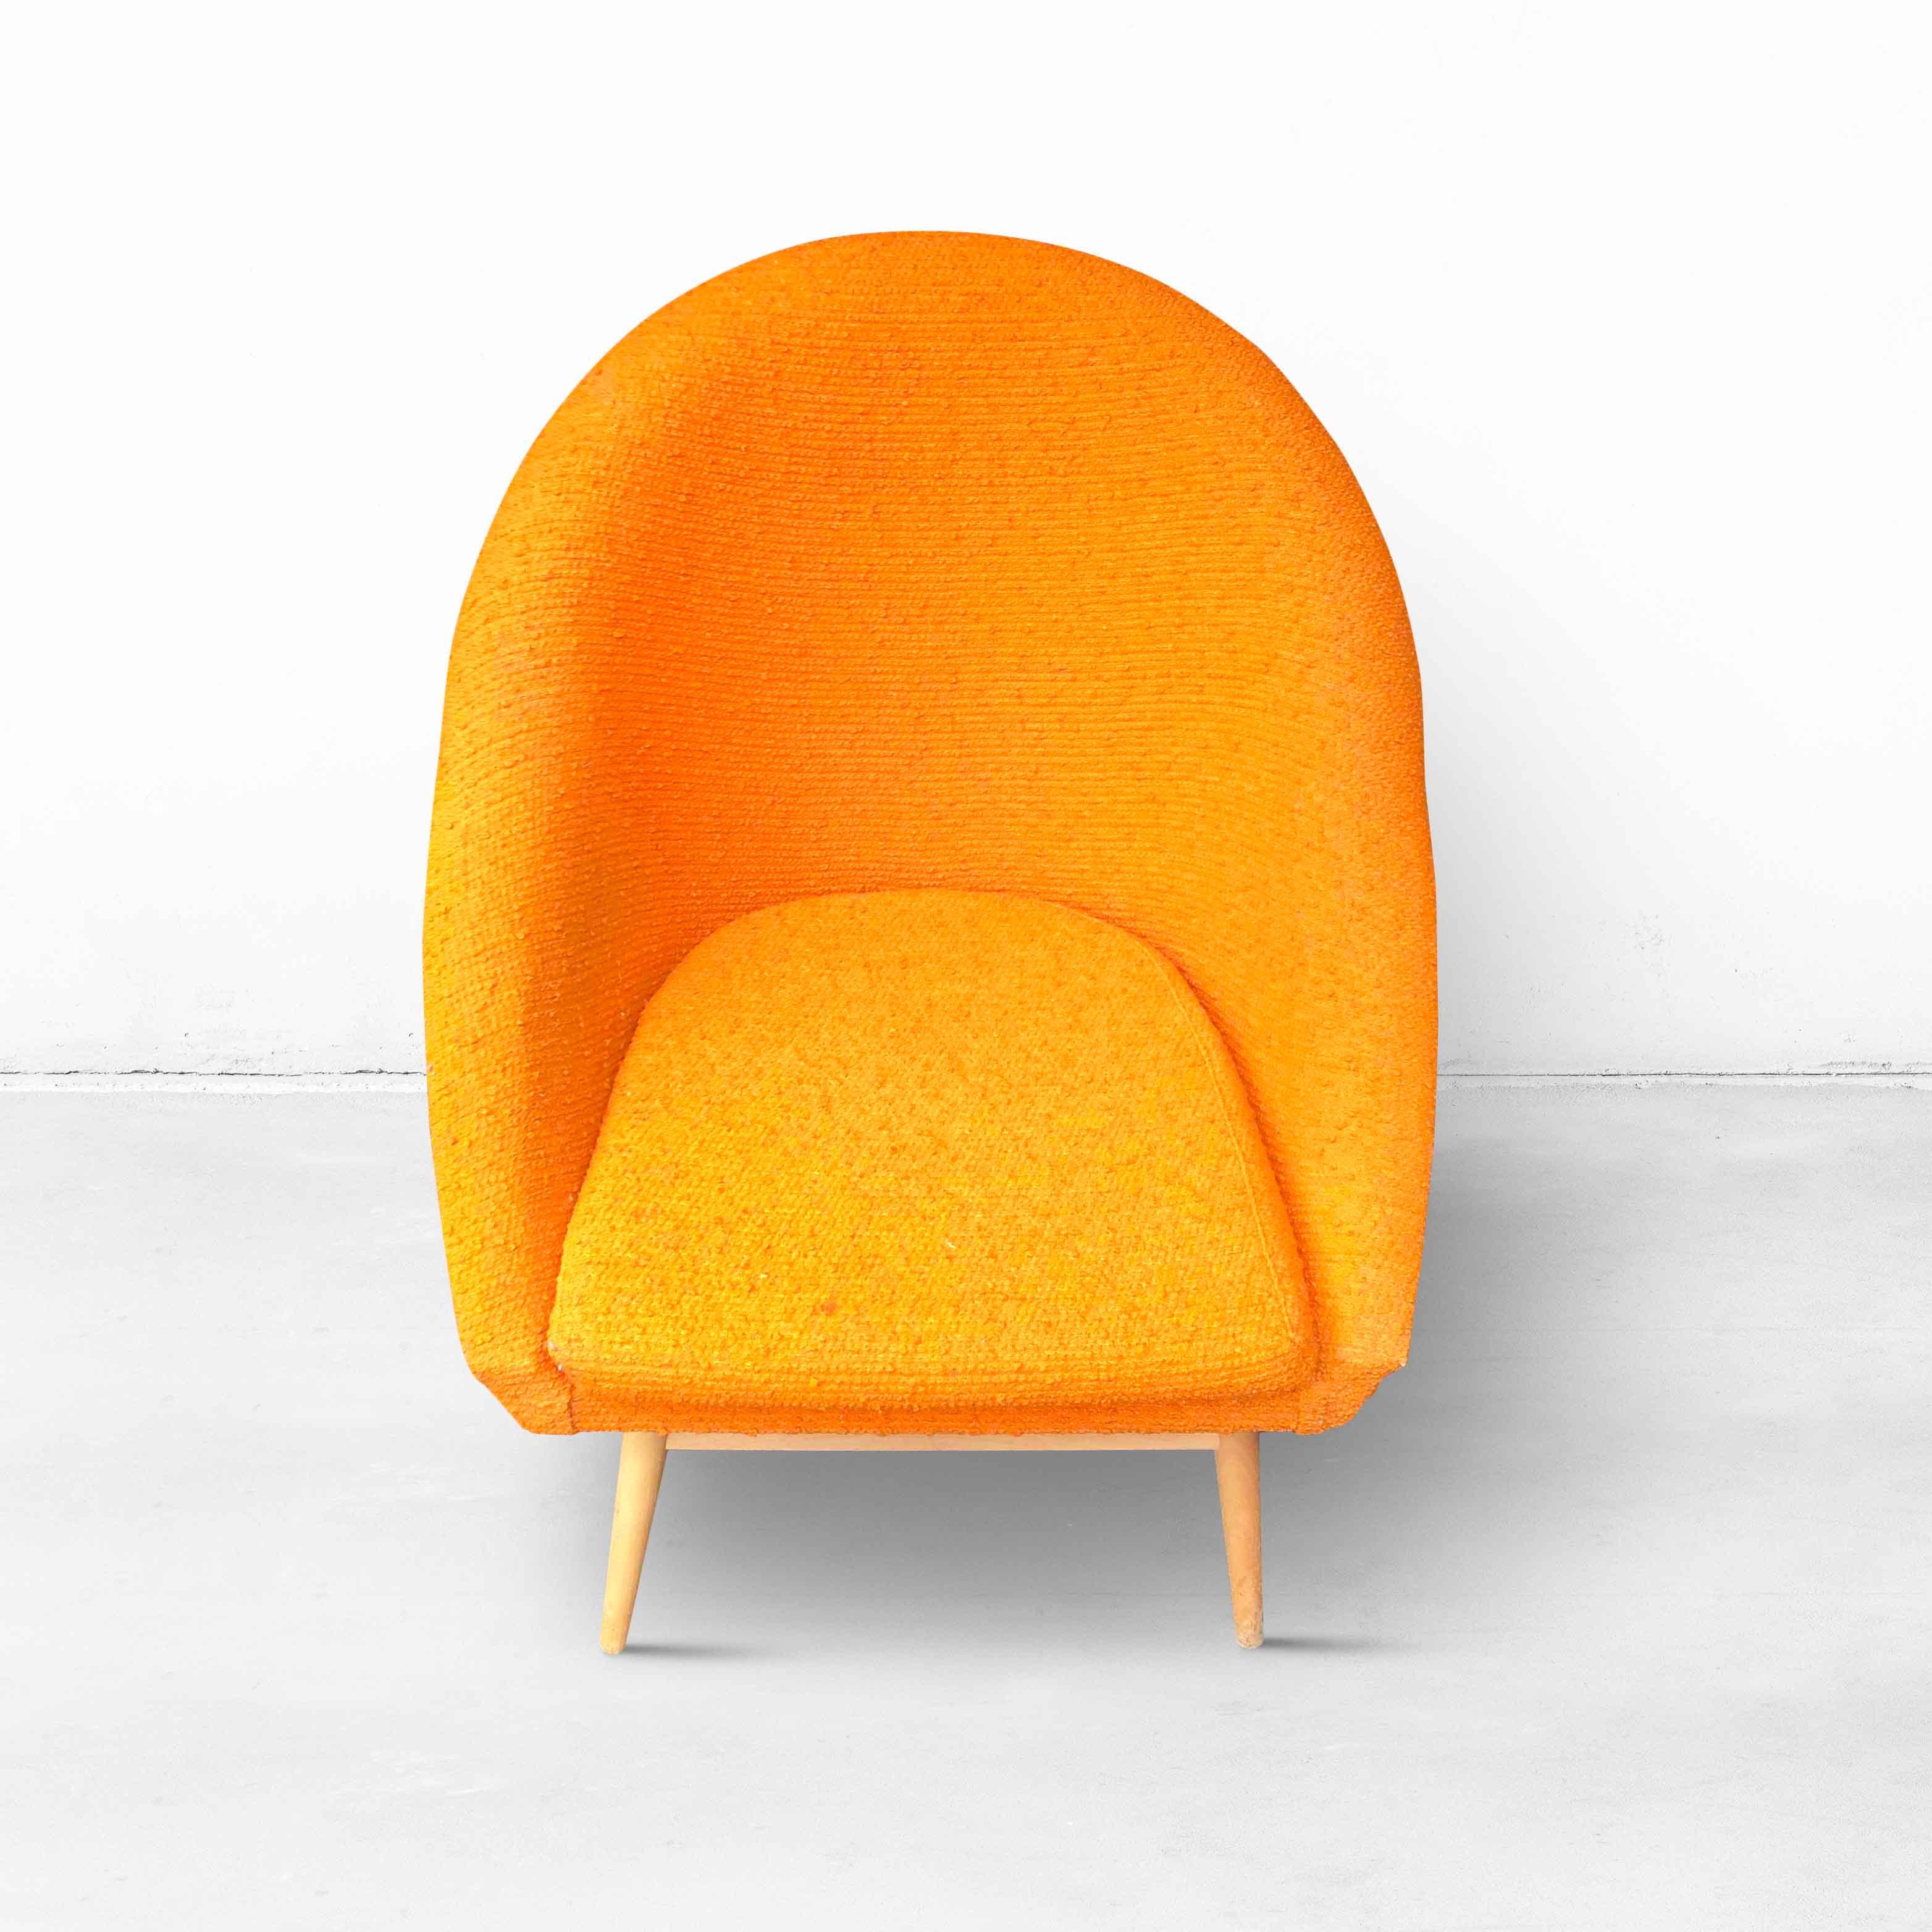 Dream away in these orange bucket seats from the 1960s. The fabric shows no stains or damage and the seating comfort is still very good. The wooden legs show some wear & tear but are still very sturdy.

Eastern Europe, 1960s
Designer/Manufacturer: